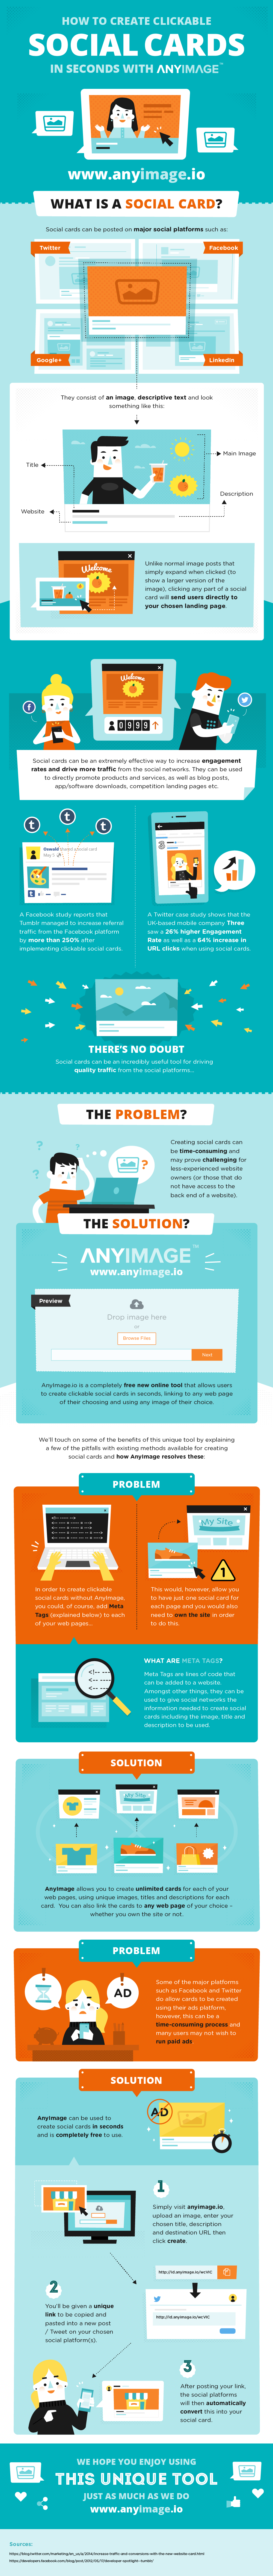 anyimage-infographic